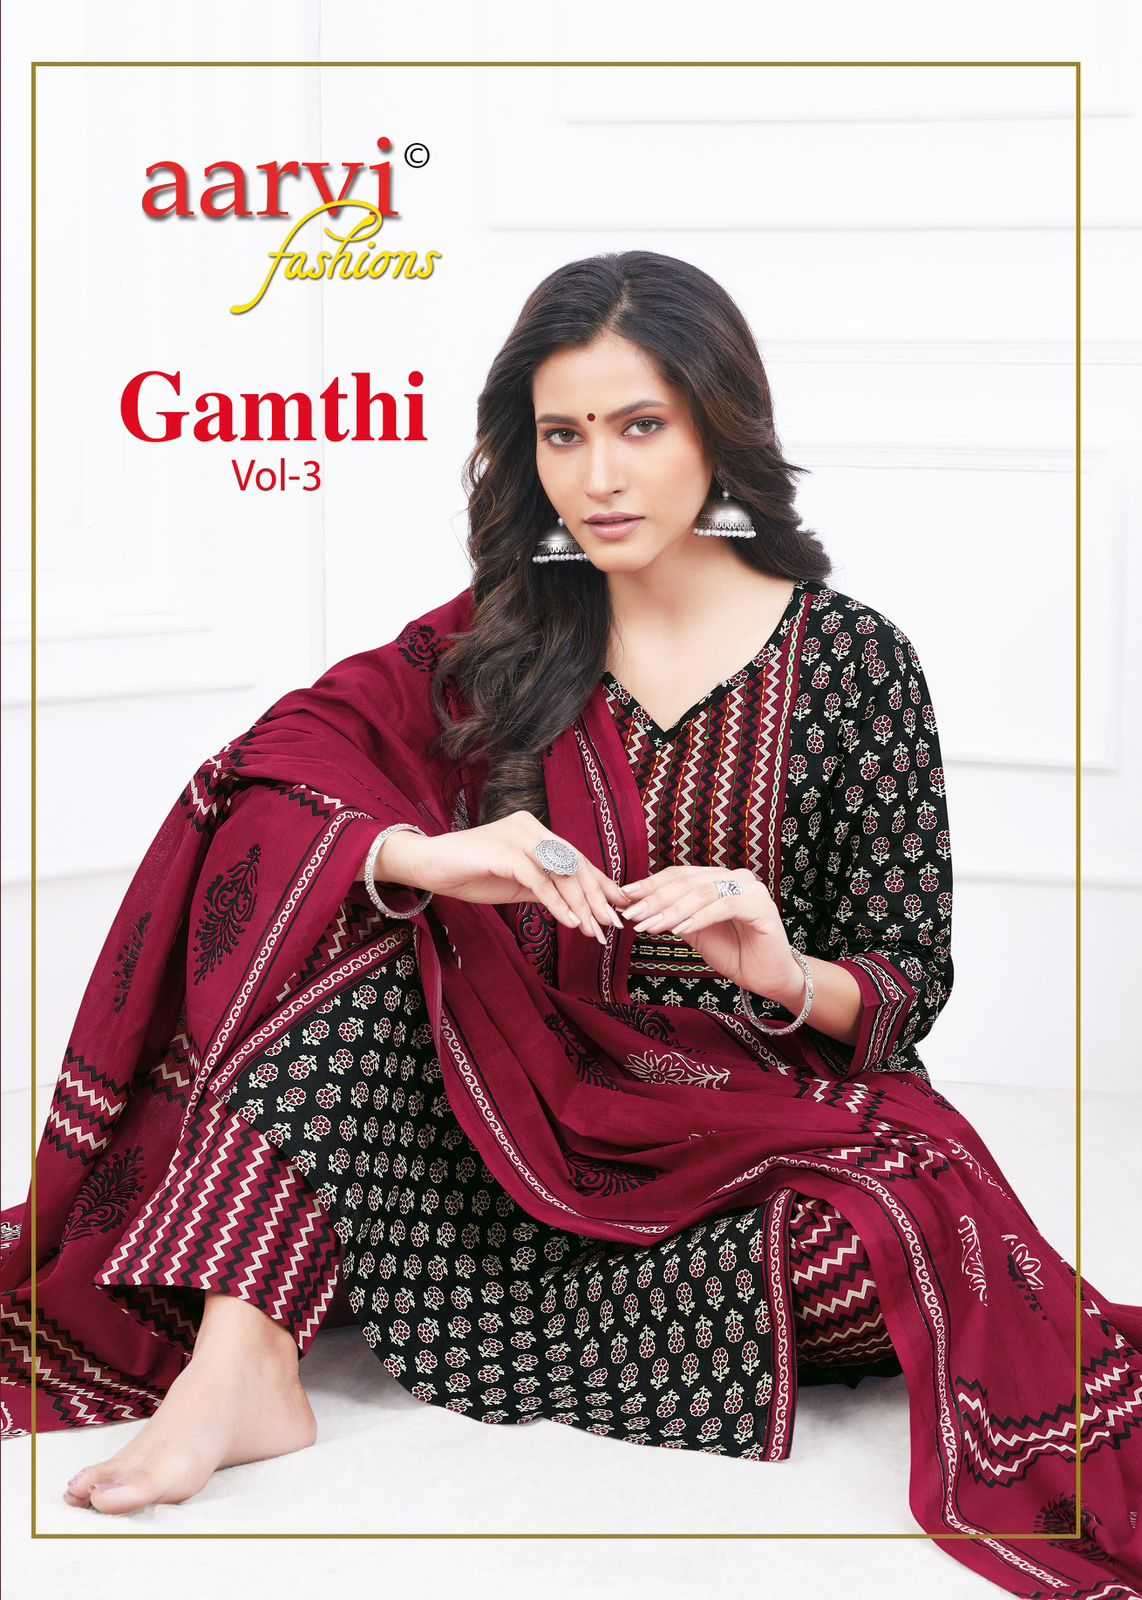 aarvi fashion gamthi vol 3 series 7251-7258 pure cotton readymade suit 